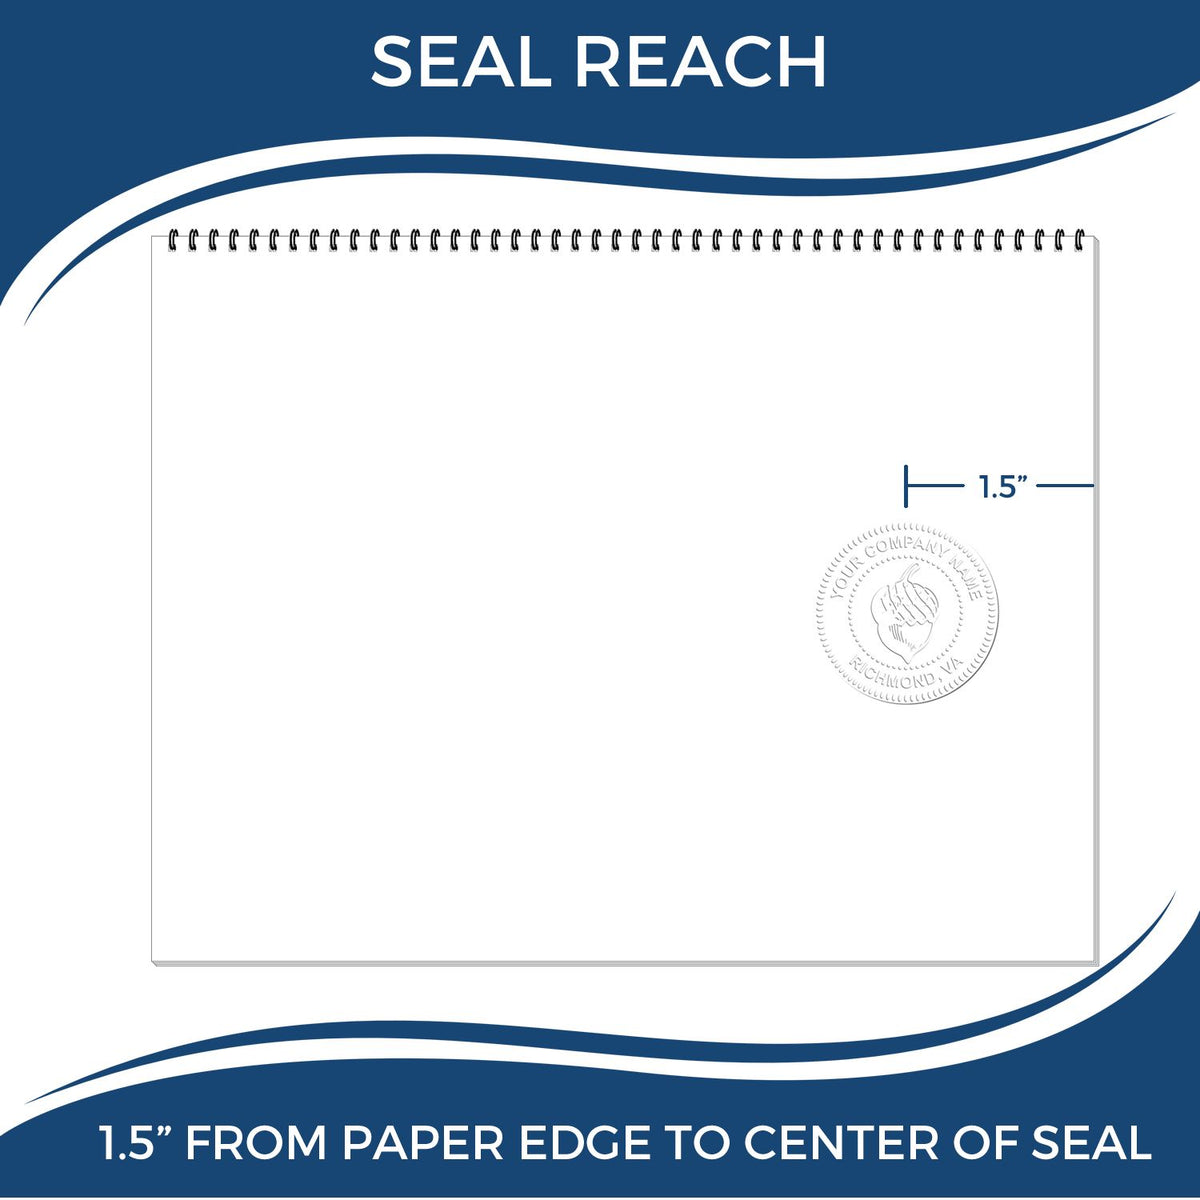 An infographic showing the seal reach which is represented by a ruler and a miniature seal image of the Hybrid Guam Landscape Architect Seal